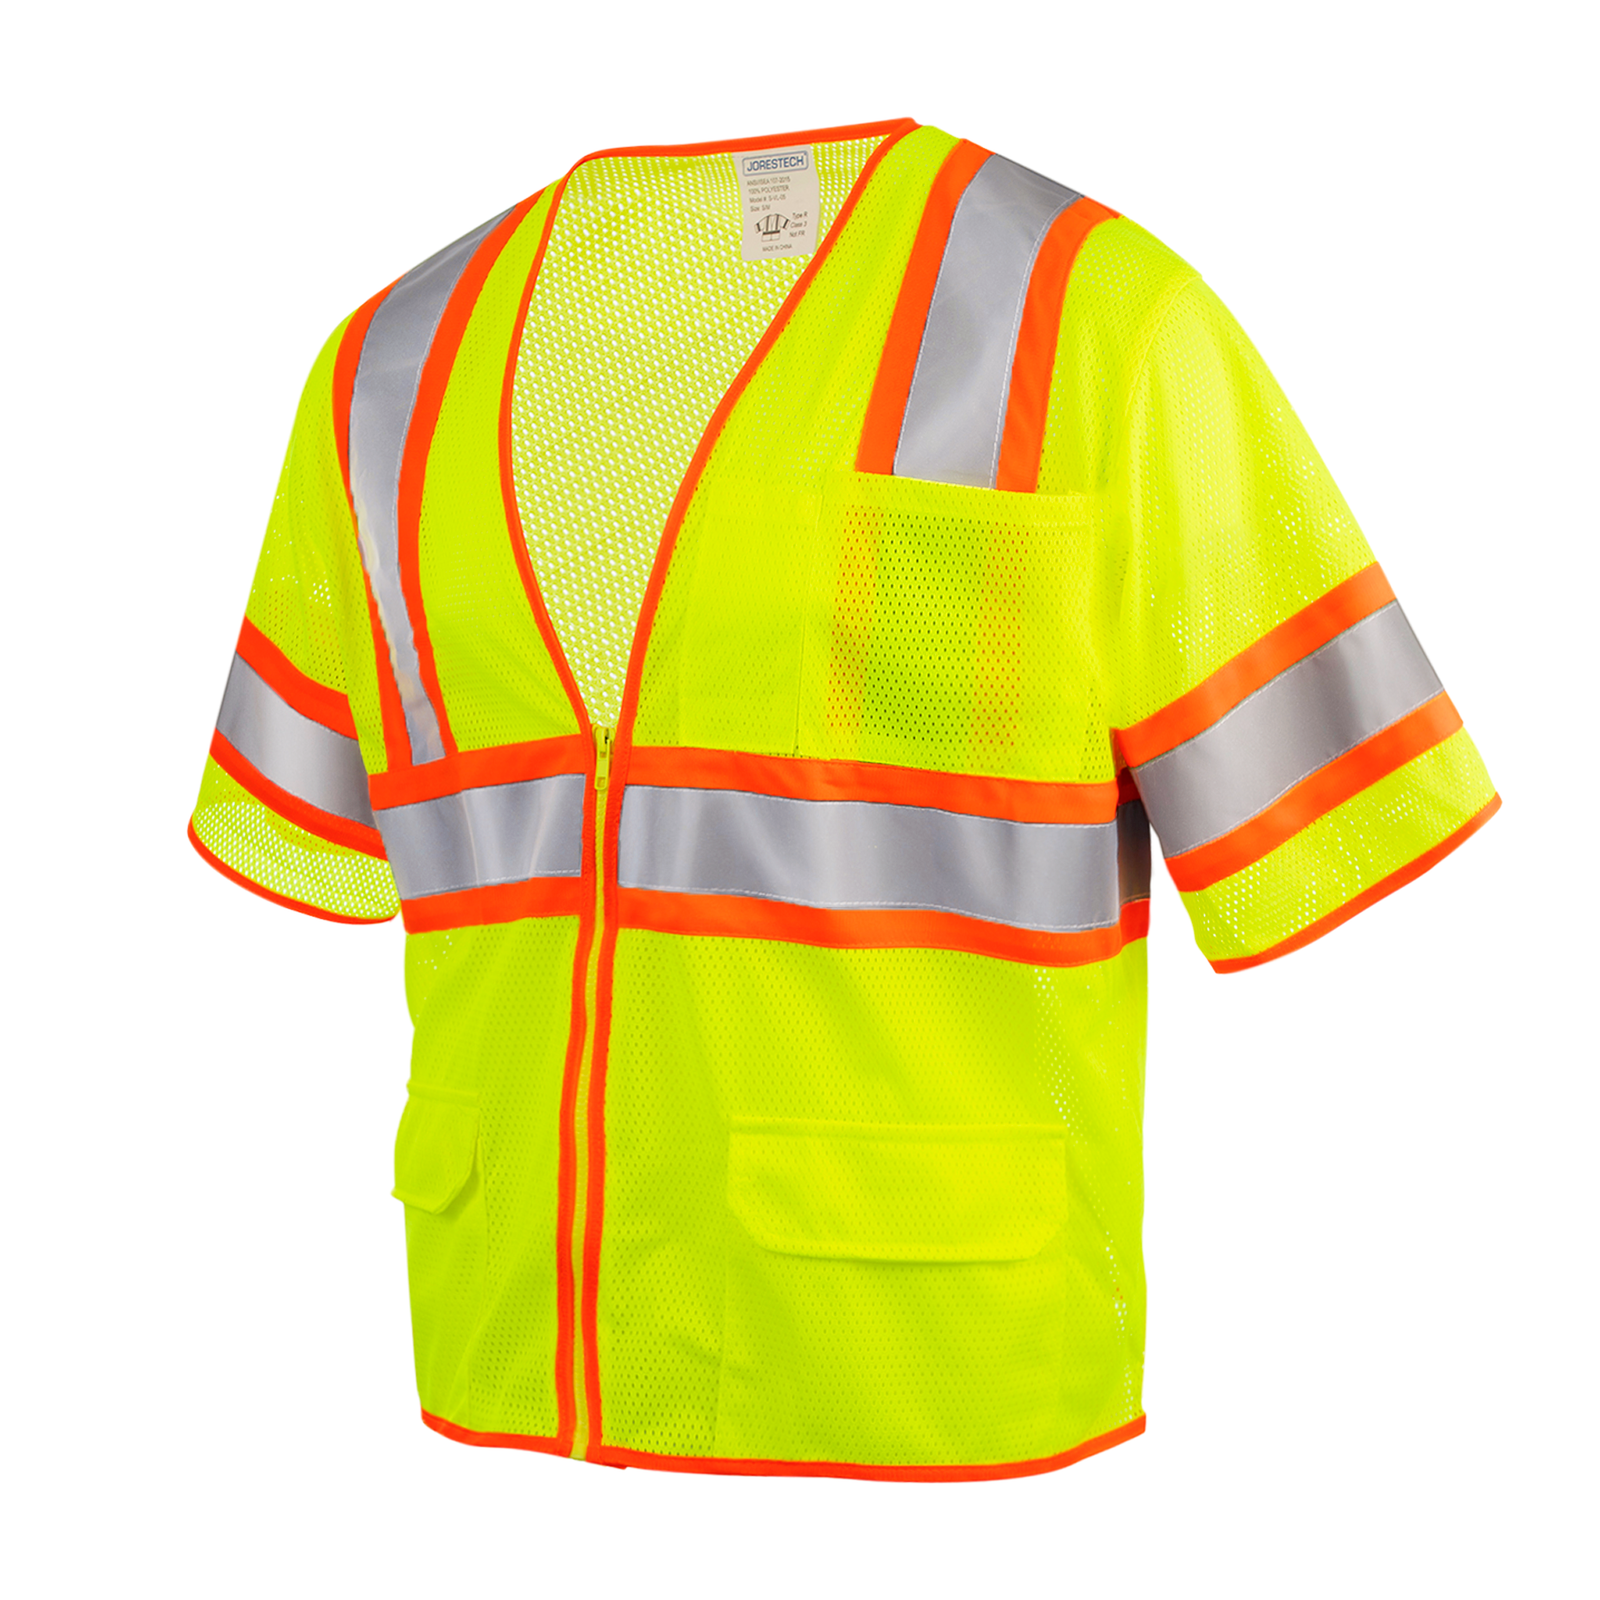 Diagonal view of the JORESTECH® Hi-Vis two toned mesh sleeved safety vest with 2 inches reflective strips over white background.